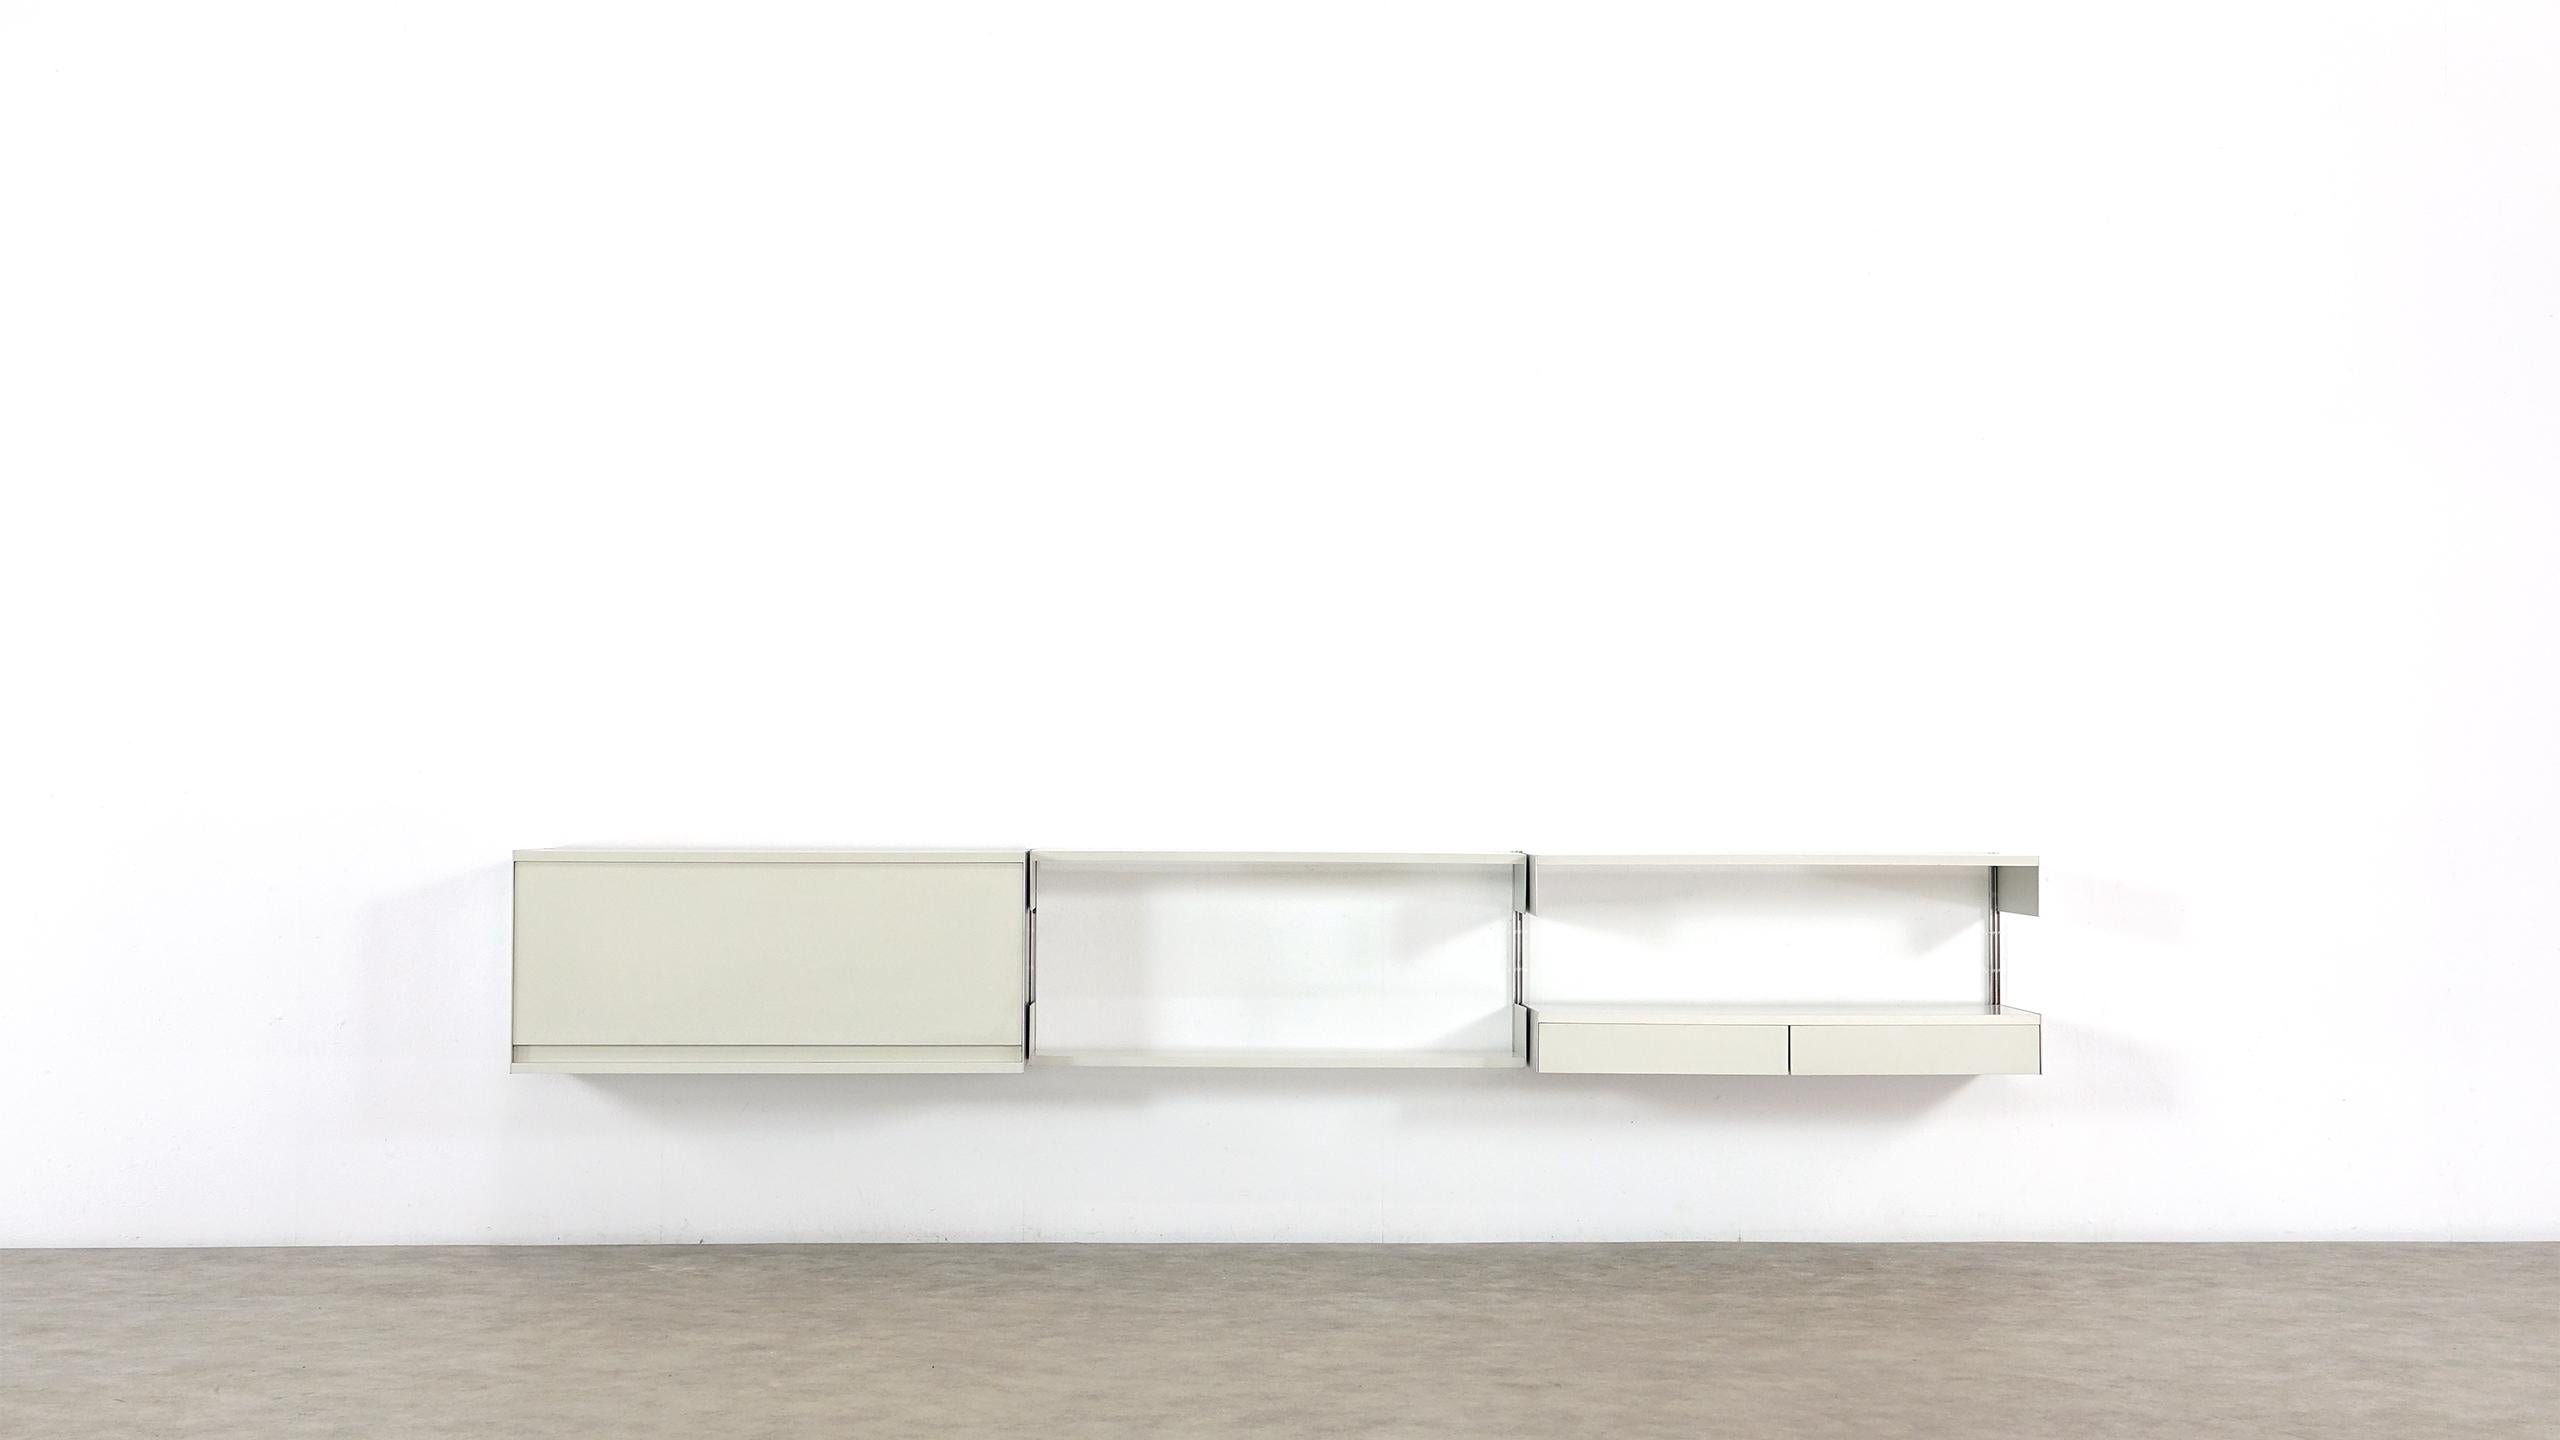 Mid-20th Century Dieter Rams Sideboard 606 Universal Shelving System for Vitsœ, Germany, 1965